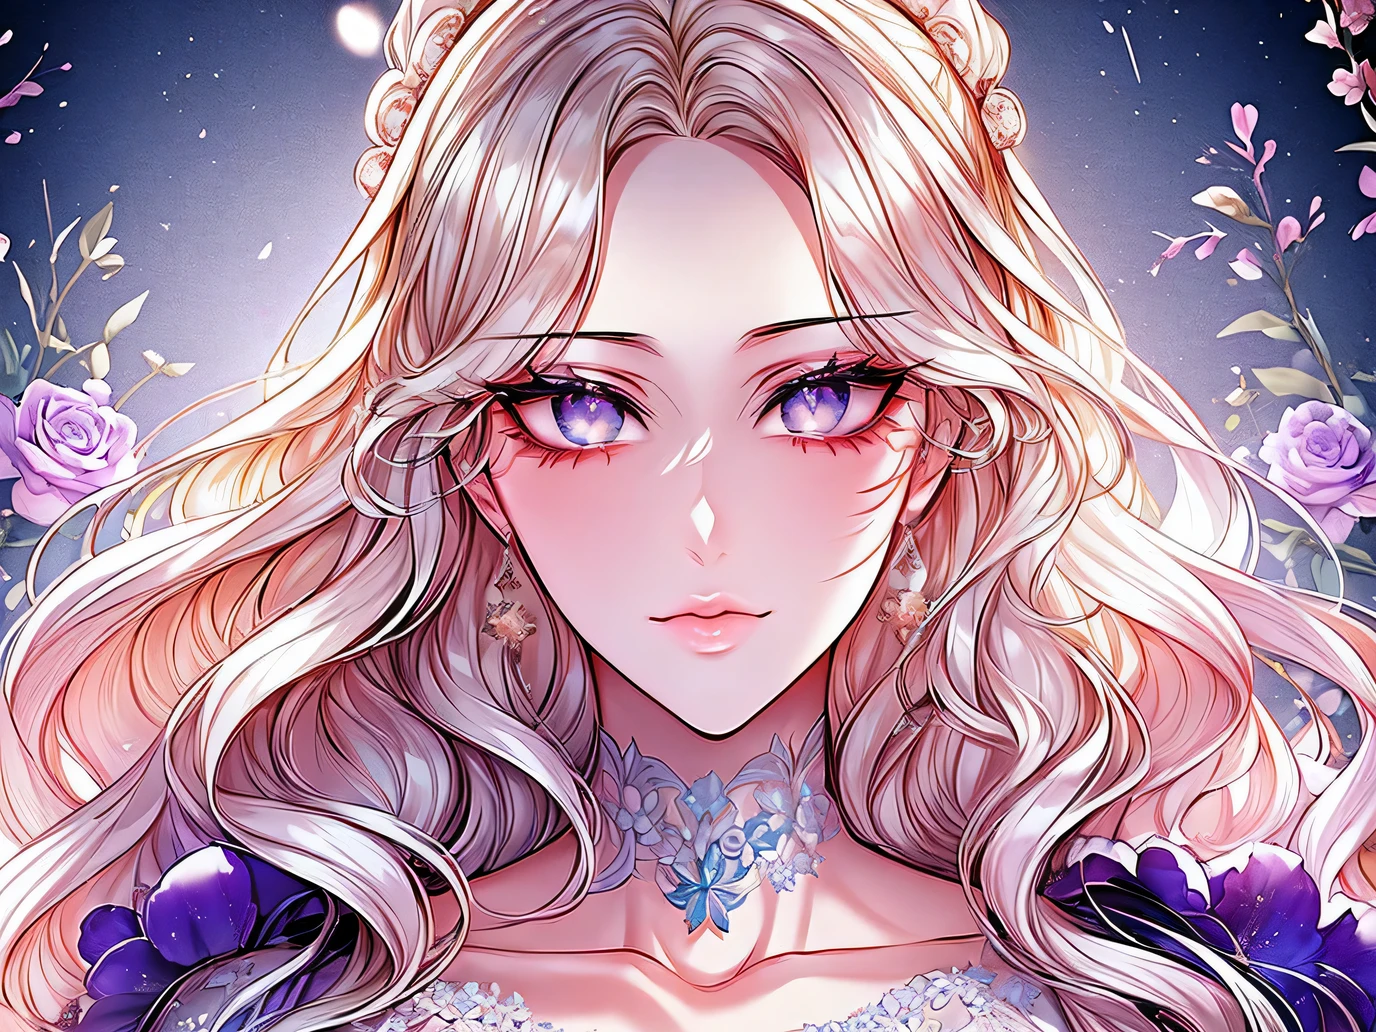 ((shoujo-style, Floral background, Romance Manfa)), (close up), (1girl in:1.2), platinum-blonde-hair, 独奏, Long hair, flower, Dress, Thick eyebrow, blue flower, Wavy Hair, Closed mouth, clavicle, Breast, cleavage, Puffy Sleeve, white Dress, purple Dress, elbow groves, earrings, Necklace, Hair Bow, Face Focus, Beautiful face, Detailed eyes, pupils on, Looking at Viewer